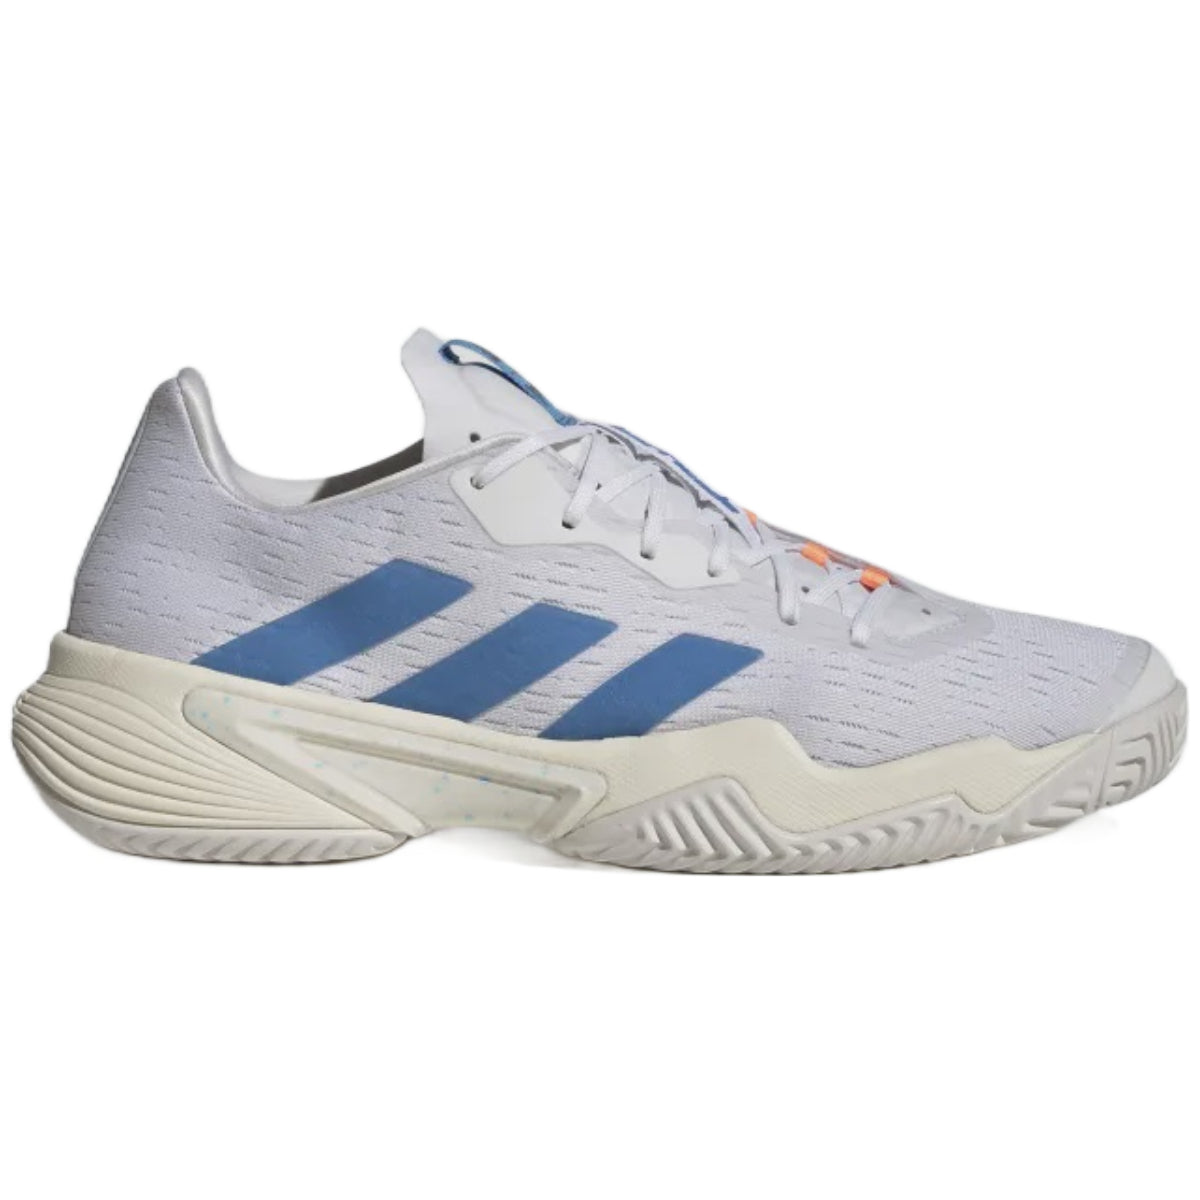 Adidas Barricade M – All About